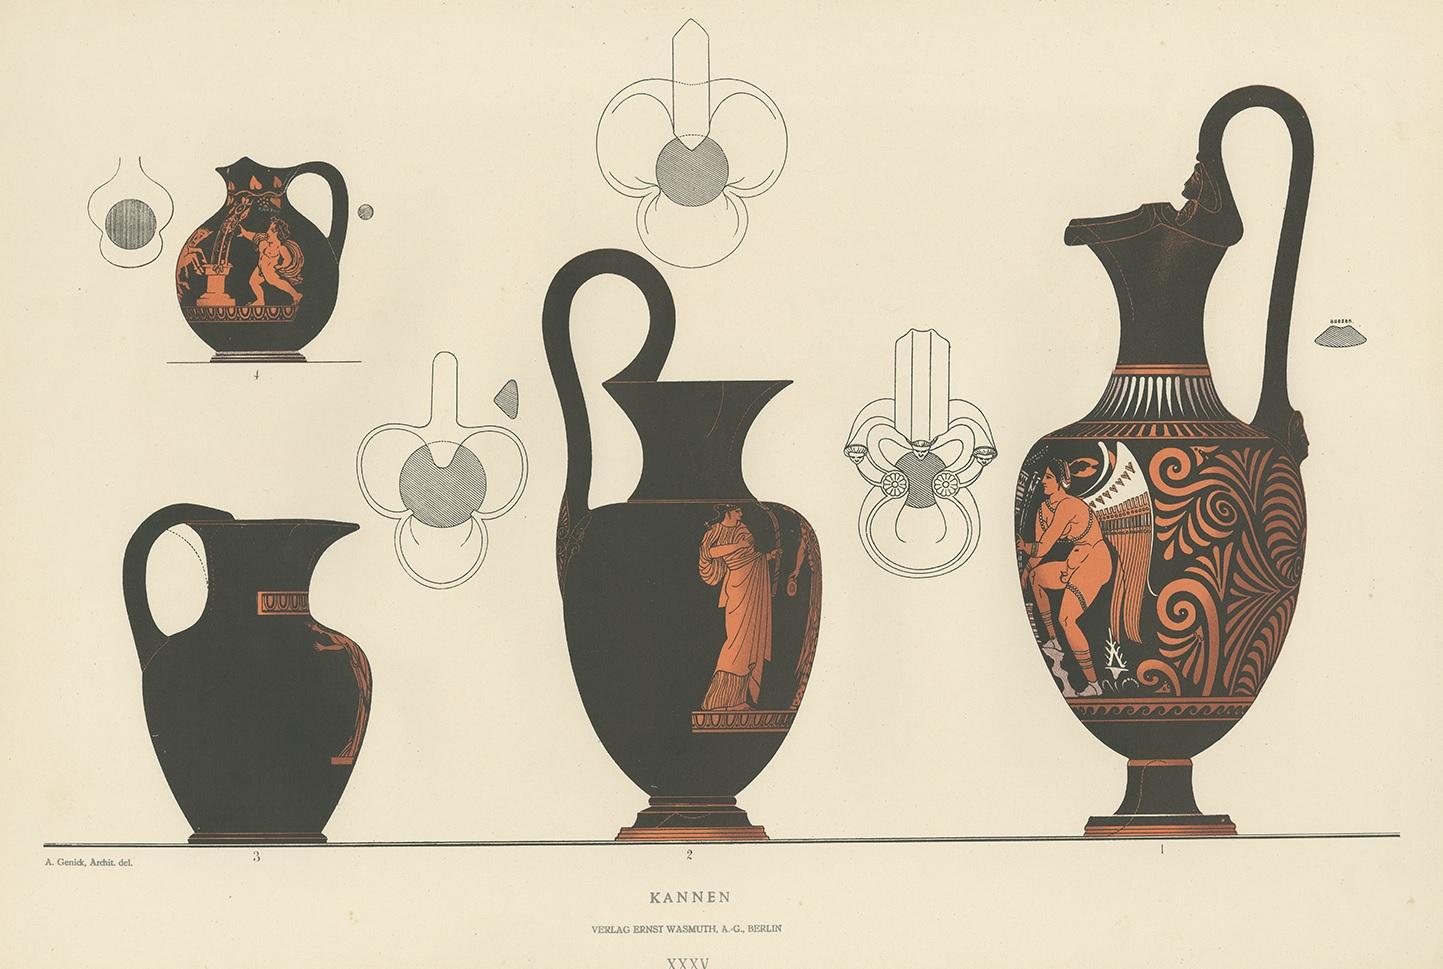 Antique print titled 'Kannen'. Color-printed large lithograph by Ernst Wasmuth depicting Greek pottery. This print originates from 'Griechische Keramik' by A. Genick. Albert Genick, an architect by training, was one of the leading German scholars of